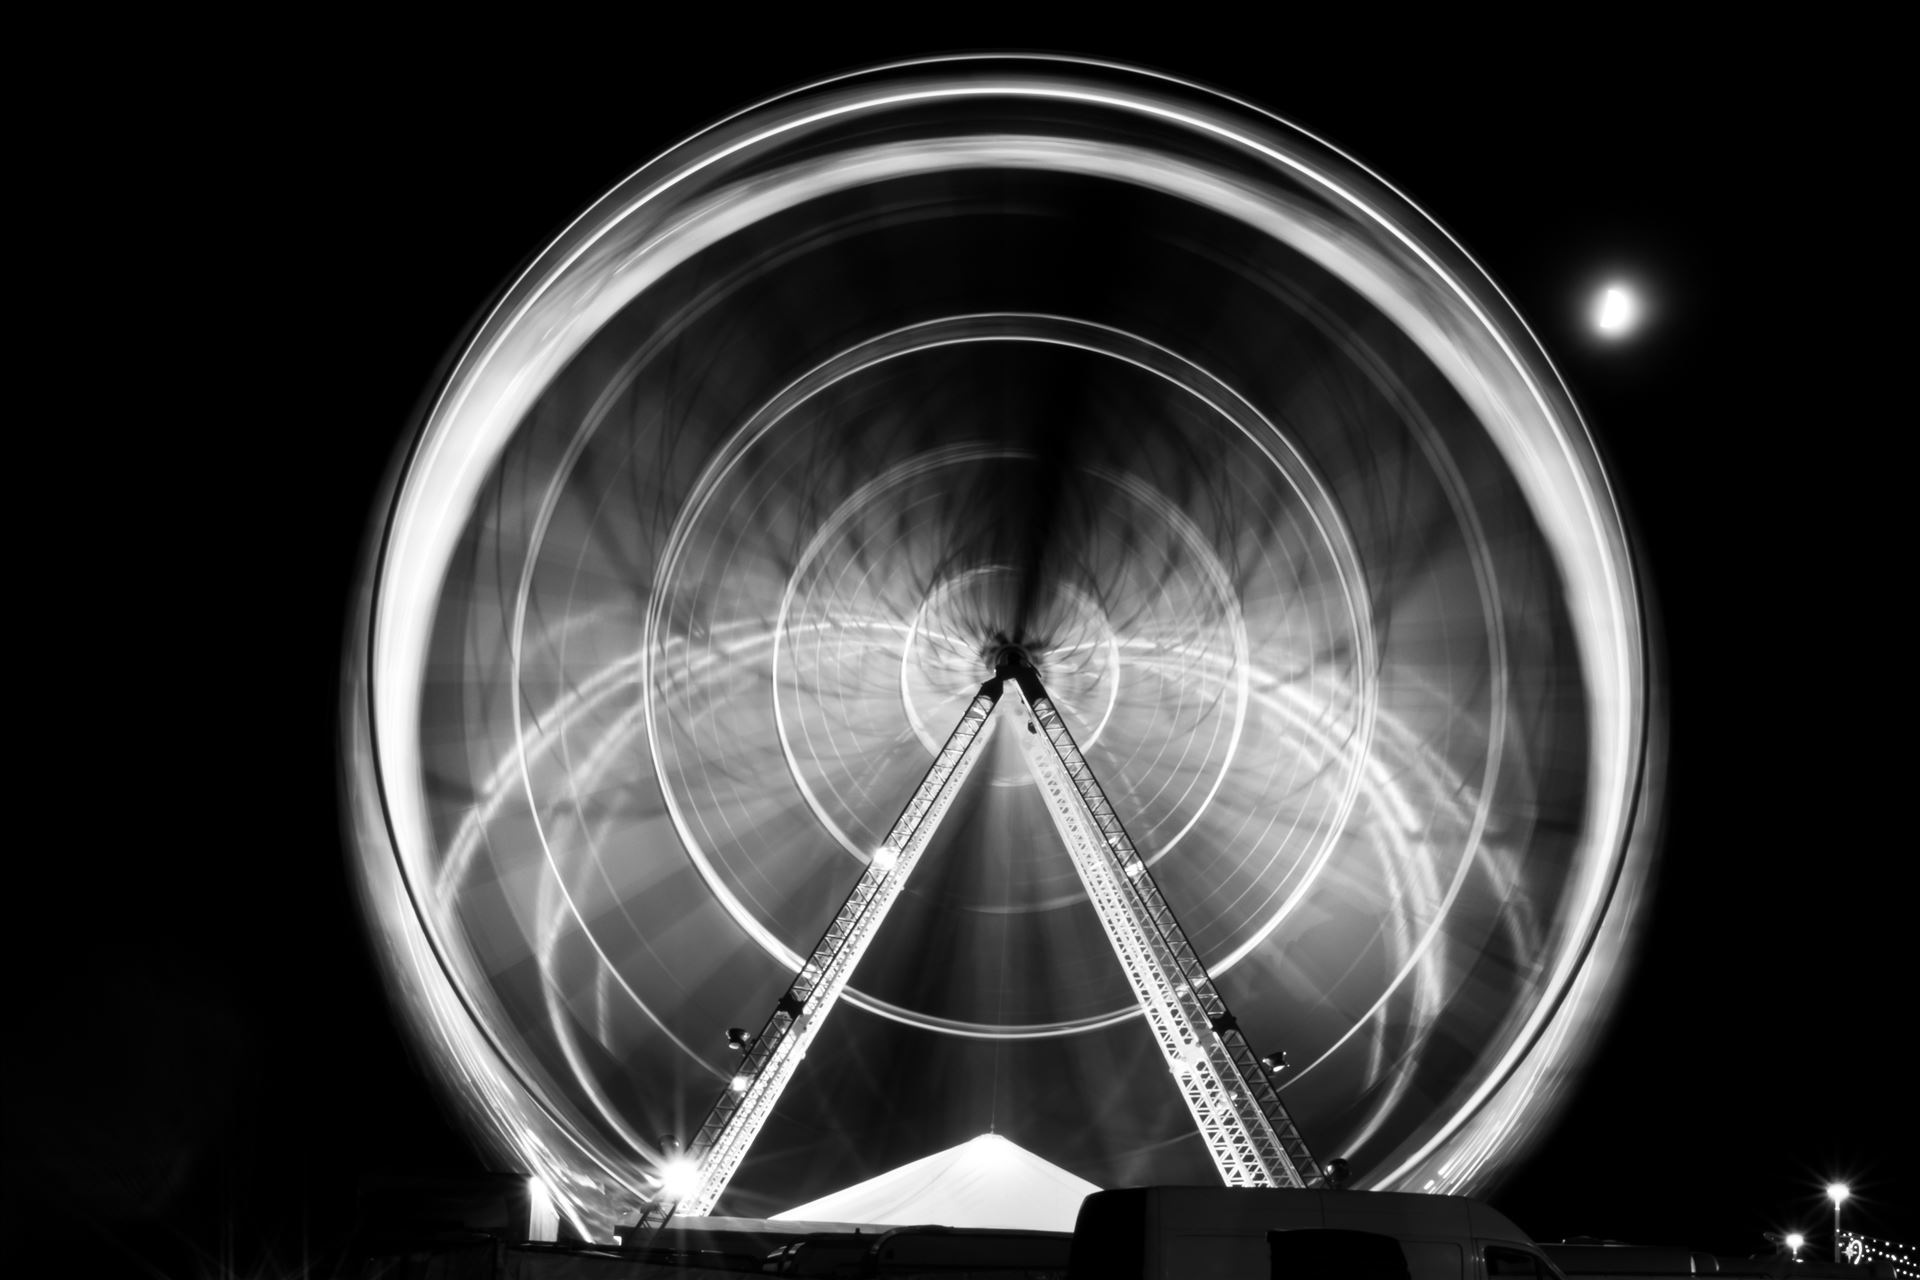 Ferris Wheel 10 second exposure A ferris wheel taken at night at Roker seafront, Sunderland by AJ Stoves Photography